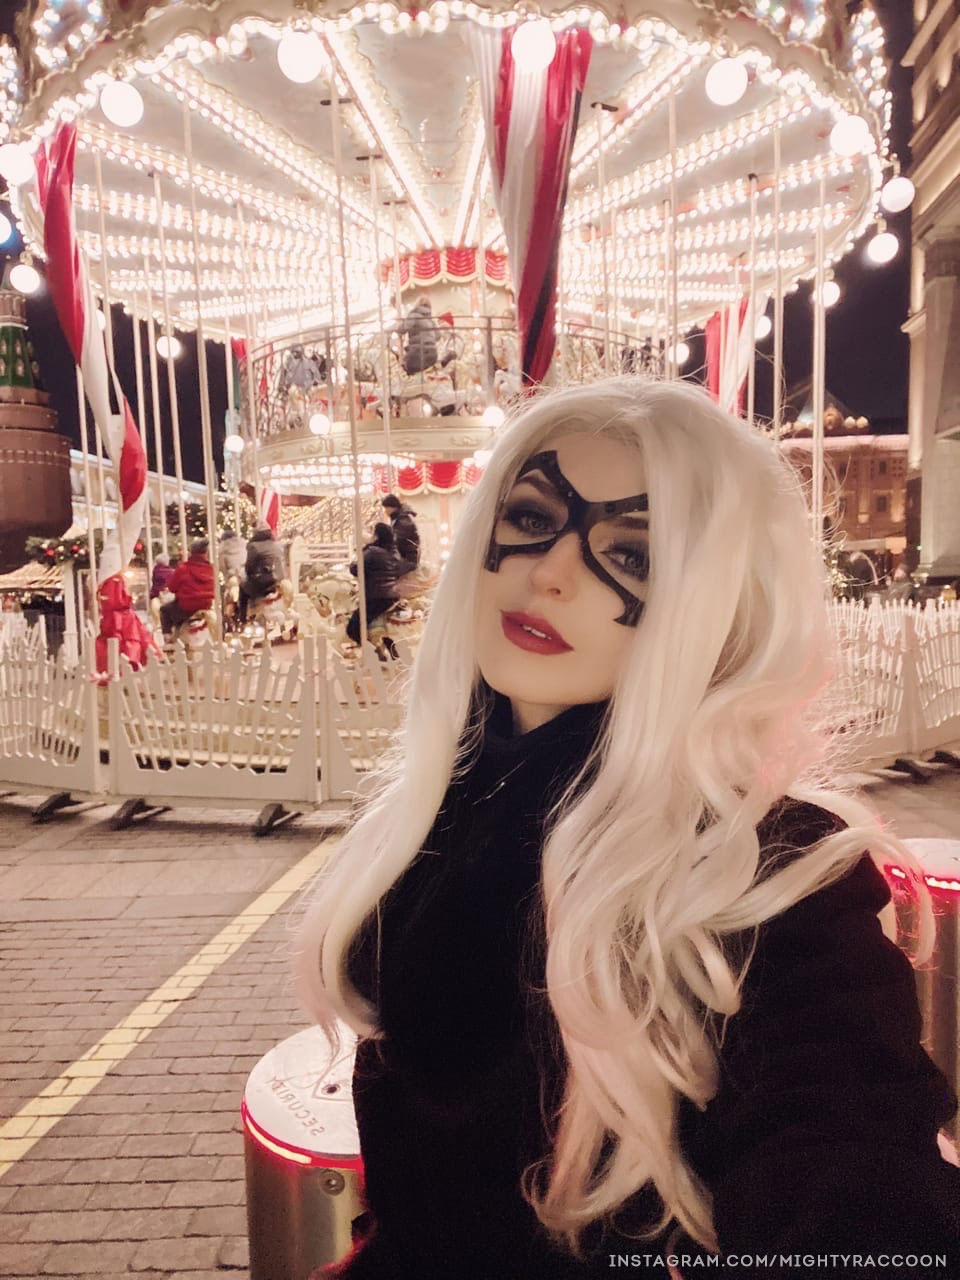 Mightyraccoon As Black Cat In The City Centr